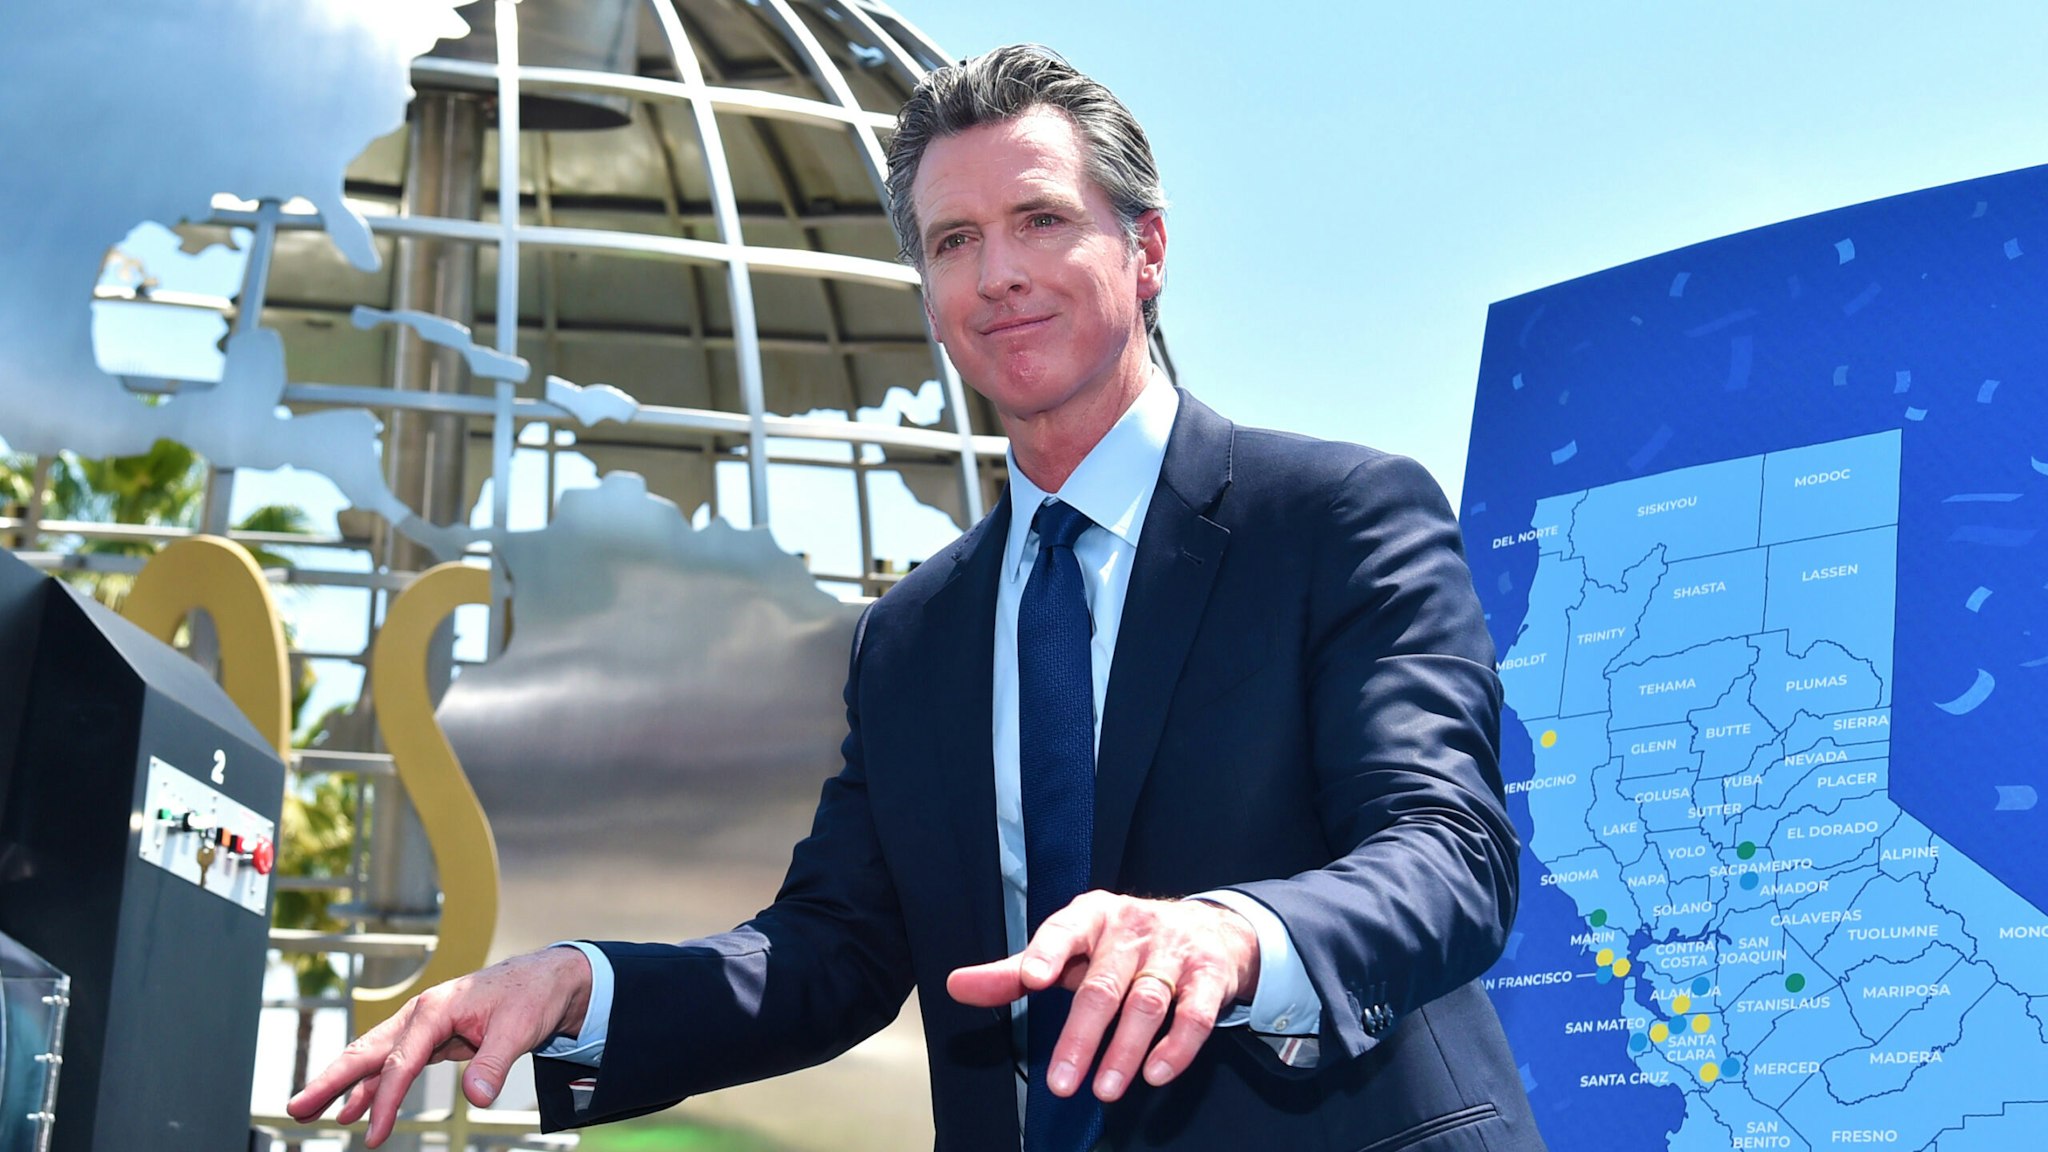 UNIVERSAL CITY, CALIFORNIA - JUNE 15: California Governor Gavin Newsom attends California Governor Gavin Newsom's press conference for the official reopening of the state of California at Universal Studios Hollywood on June 15, 2021 in Universal City, California.